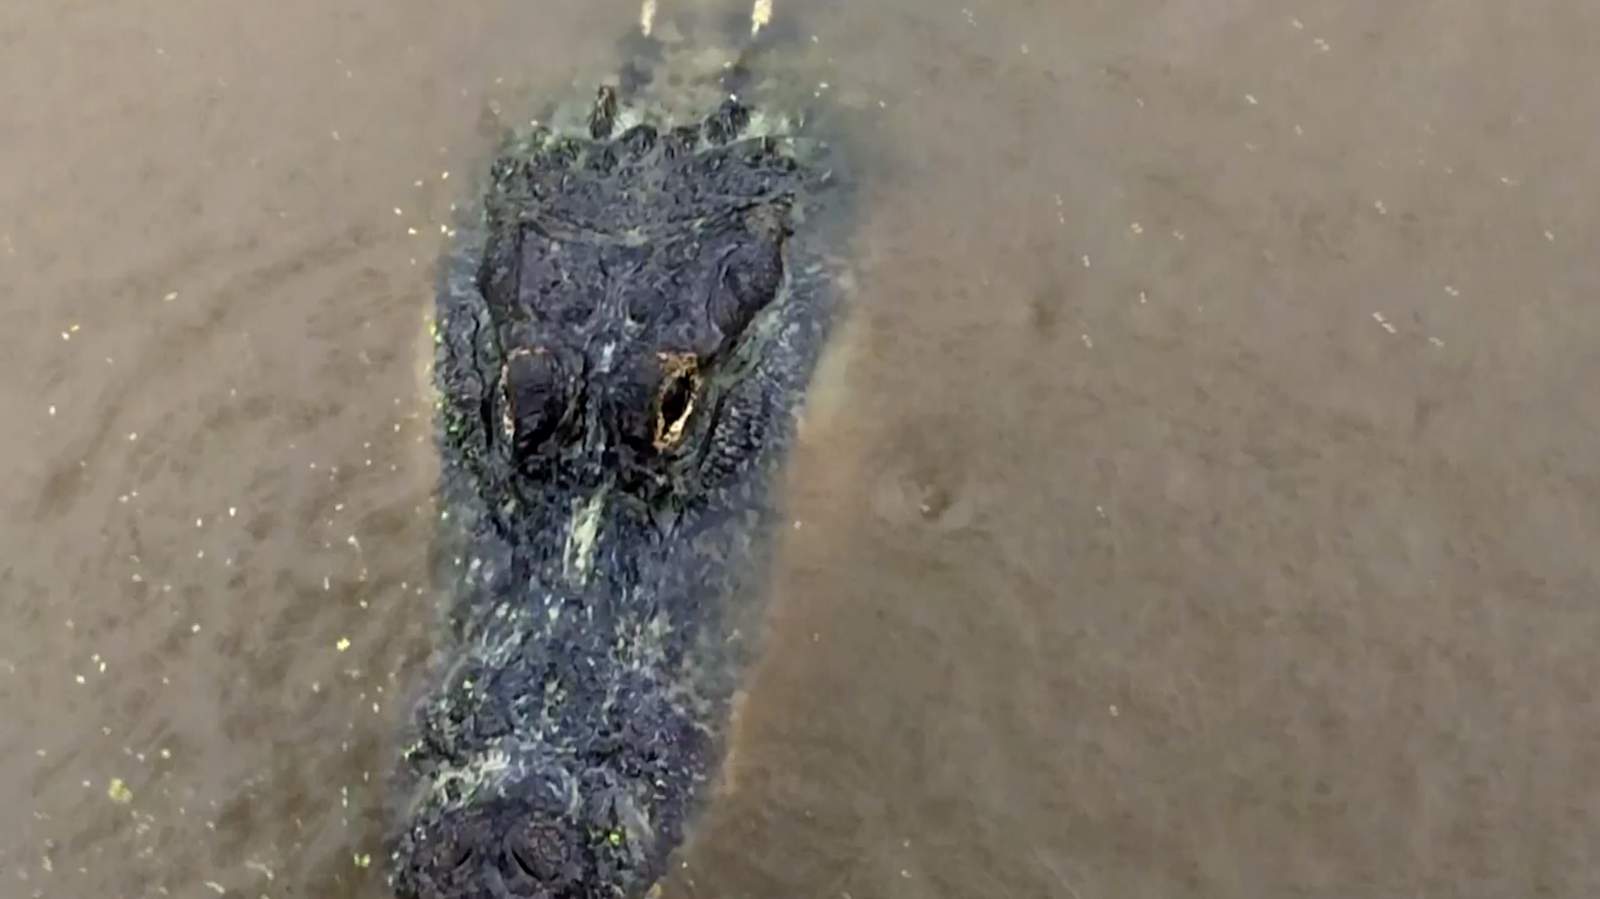 'Sigh of relief': Sally spares a Mississippi gator ranch